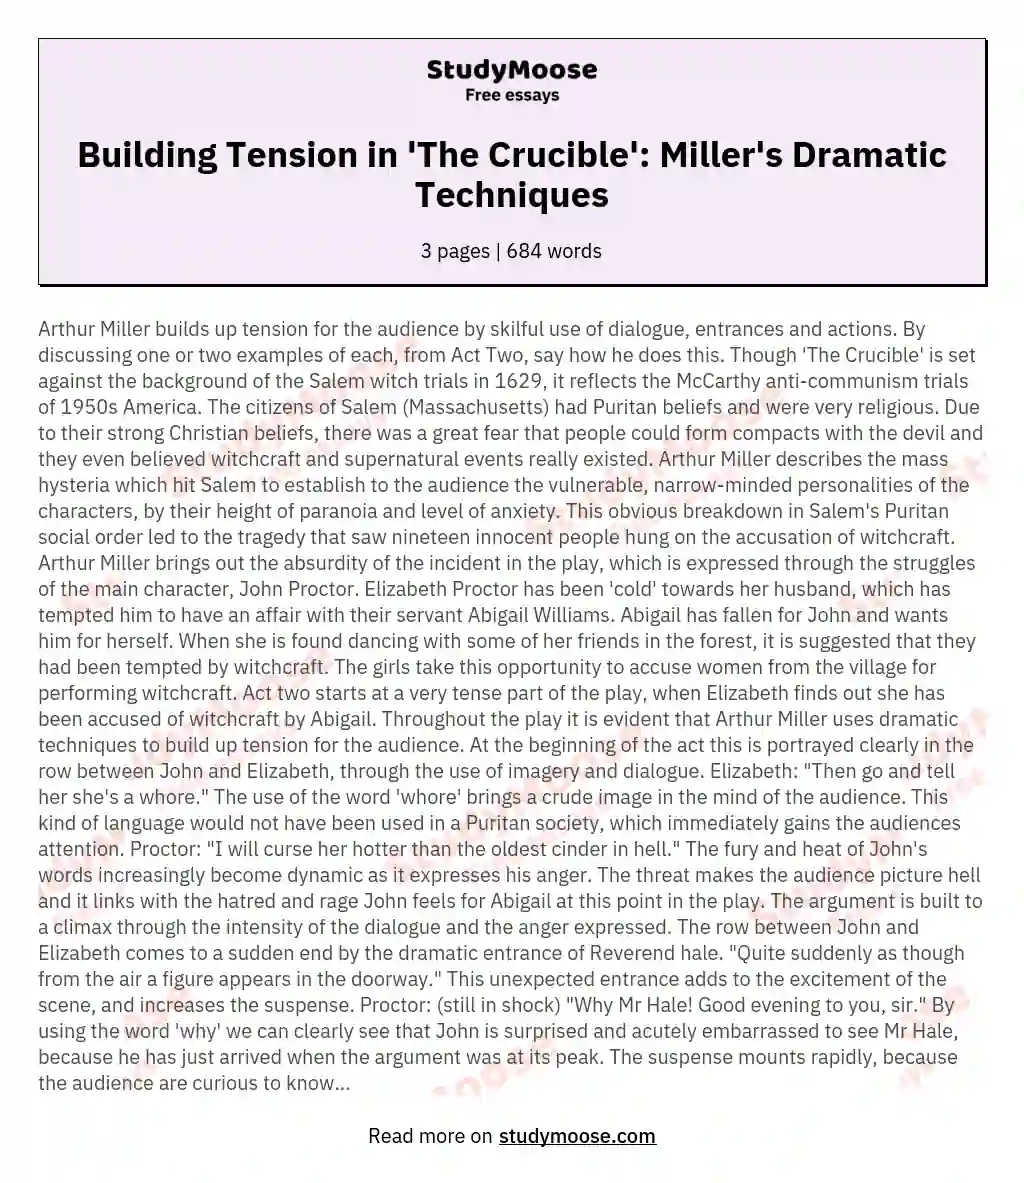 Building Tension in 'The Crucible': Miller's Dramatic Techniques essay